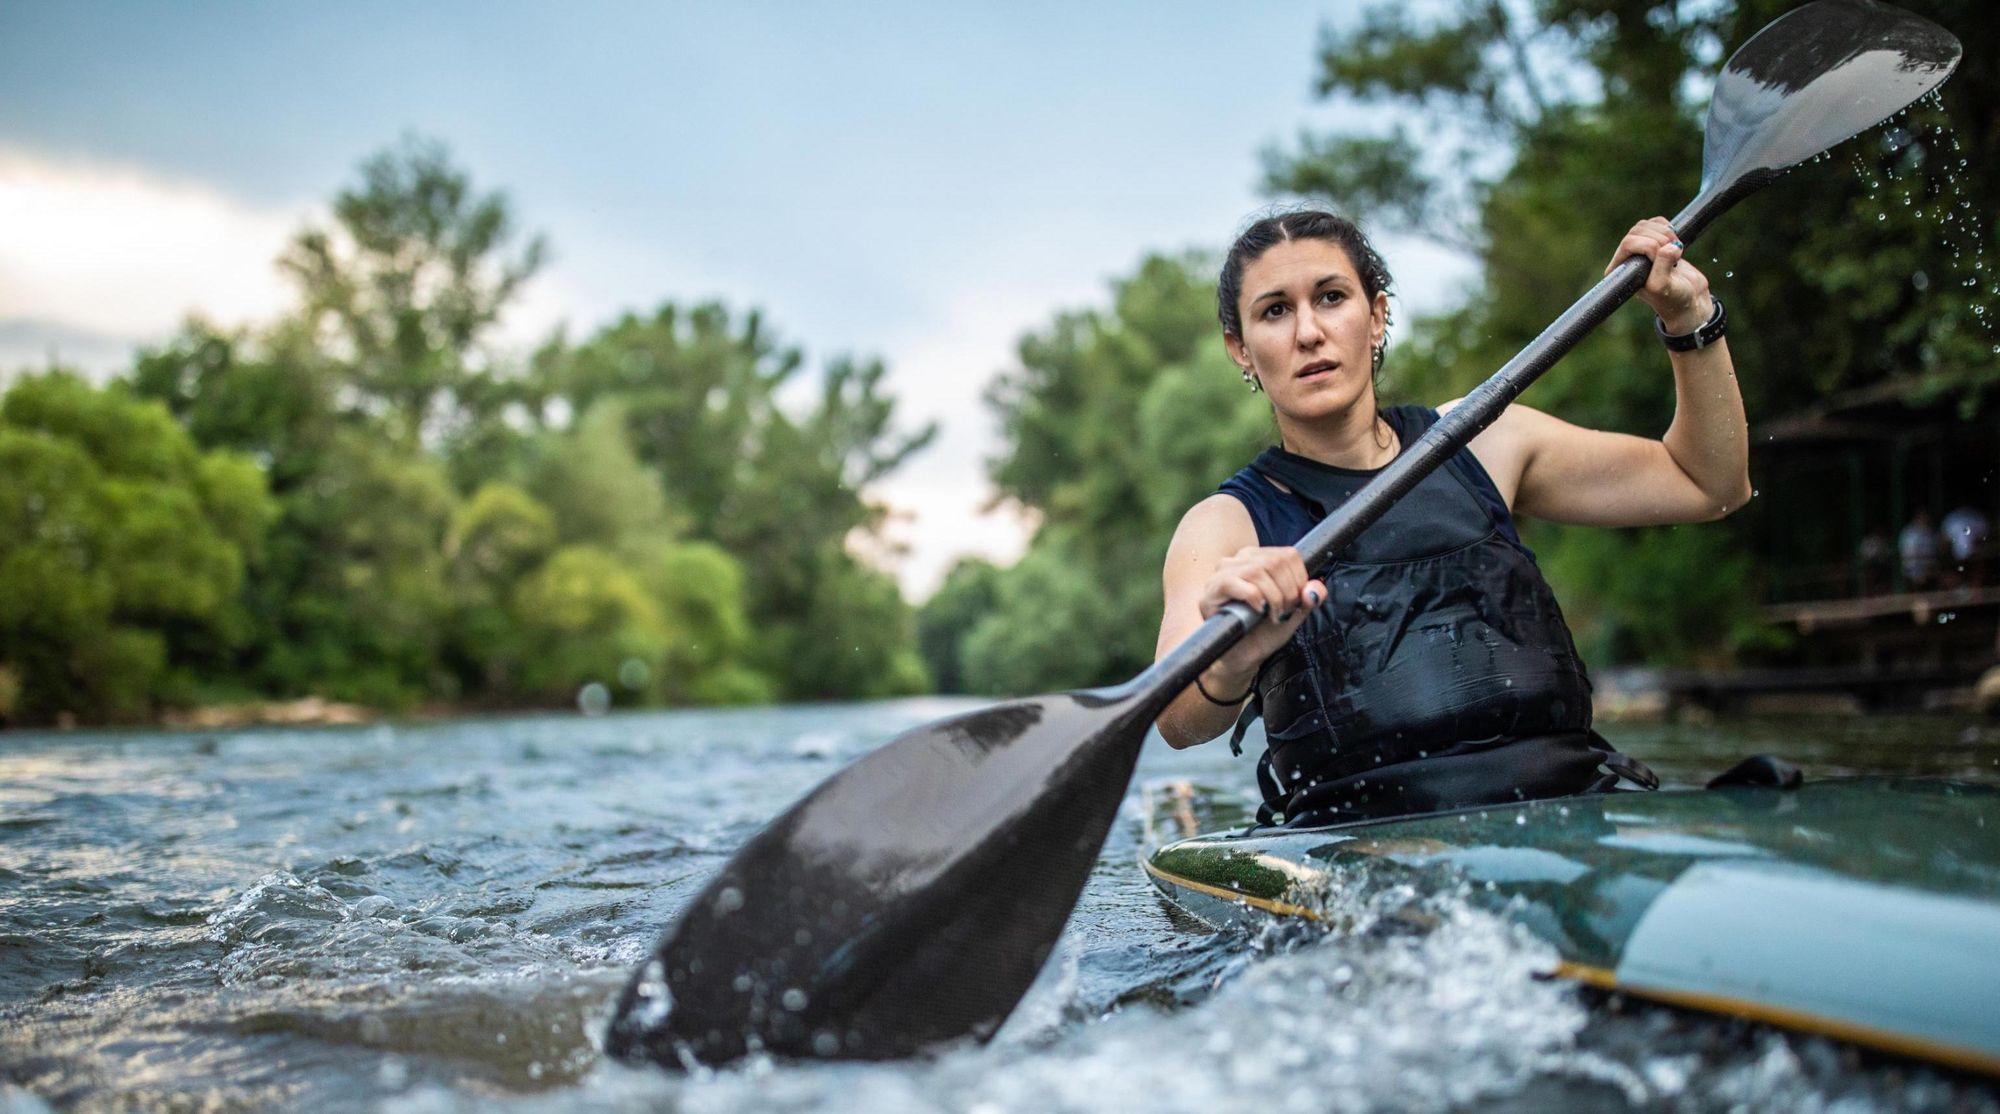 How to Prepare for a Canoe or Kayak Adventure